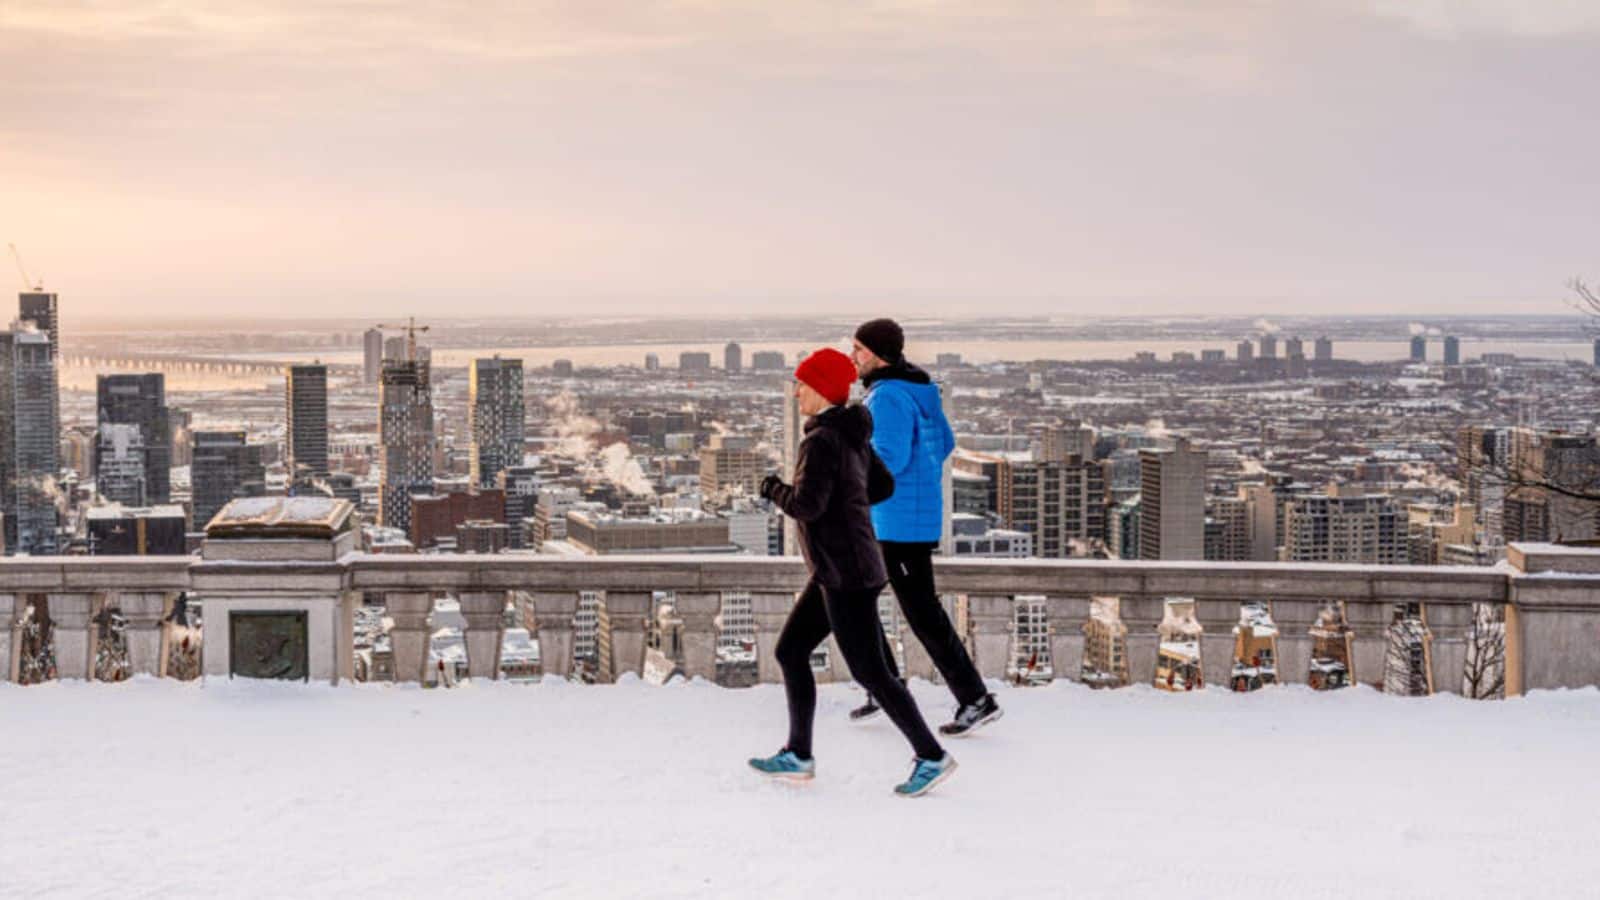 Montreal's winter snowshoeing is an activity you can't miss